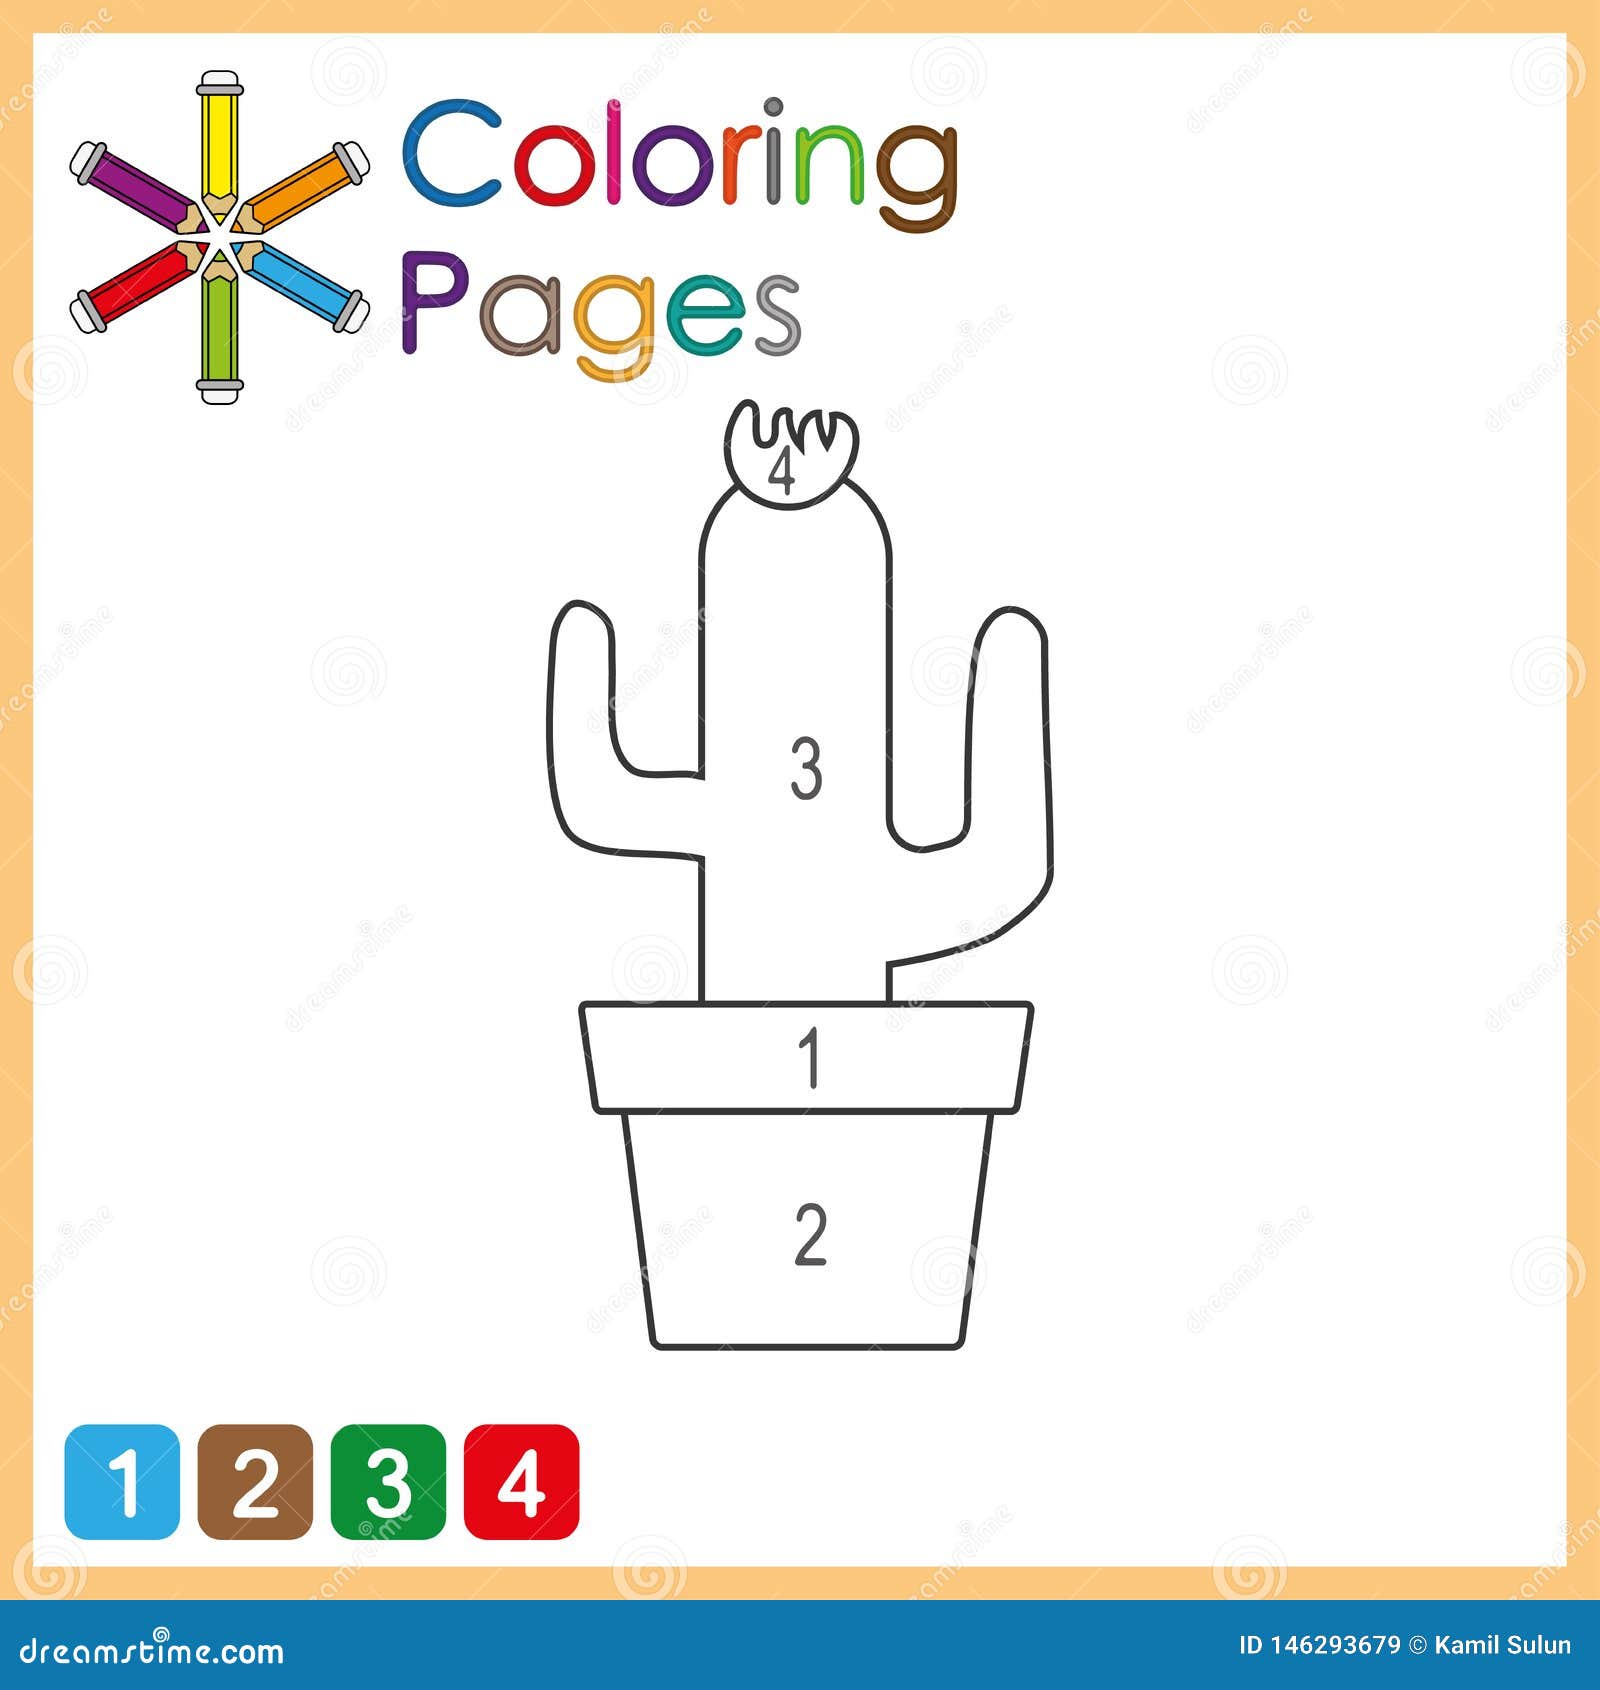 coloring page for kids, color the parts of the object according to numbers, color by numbers